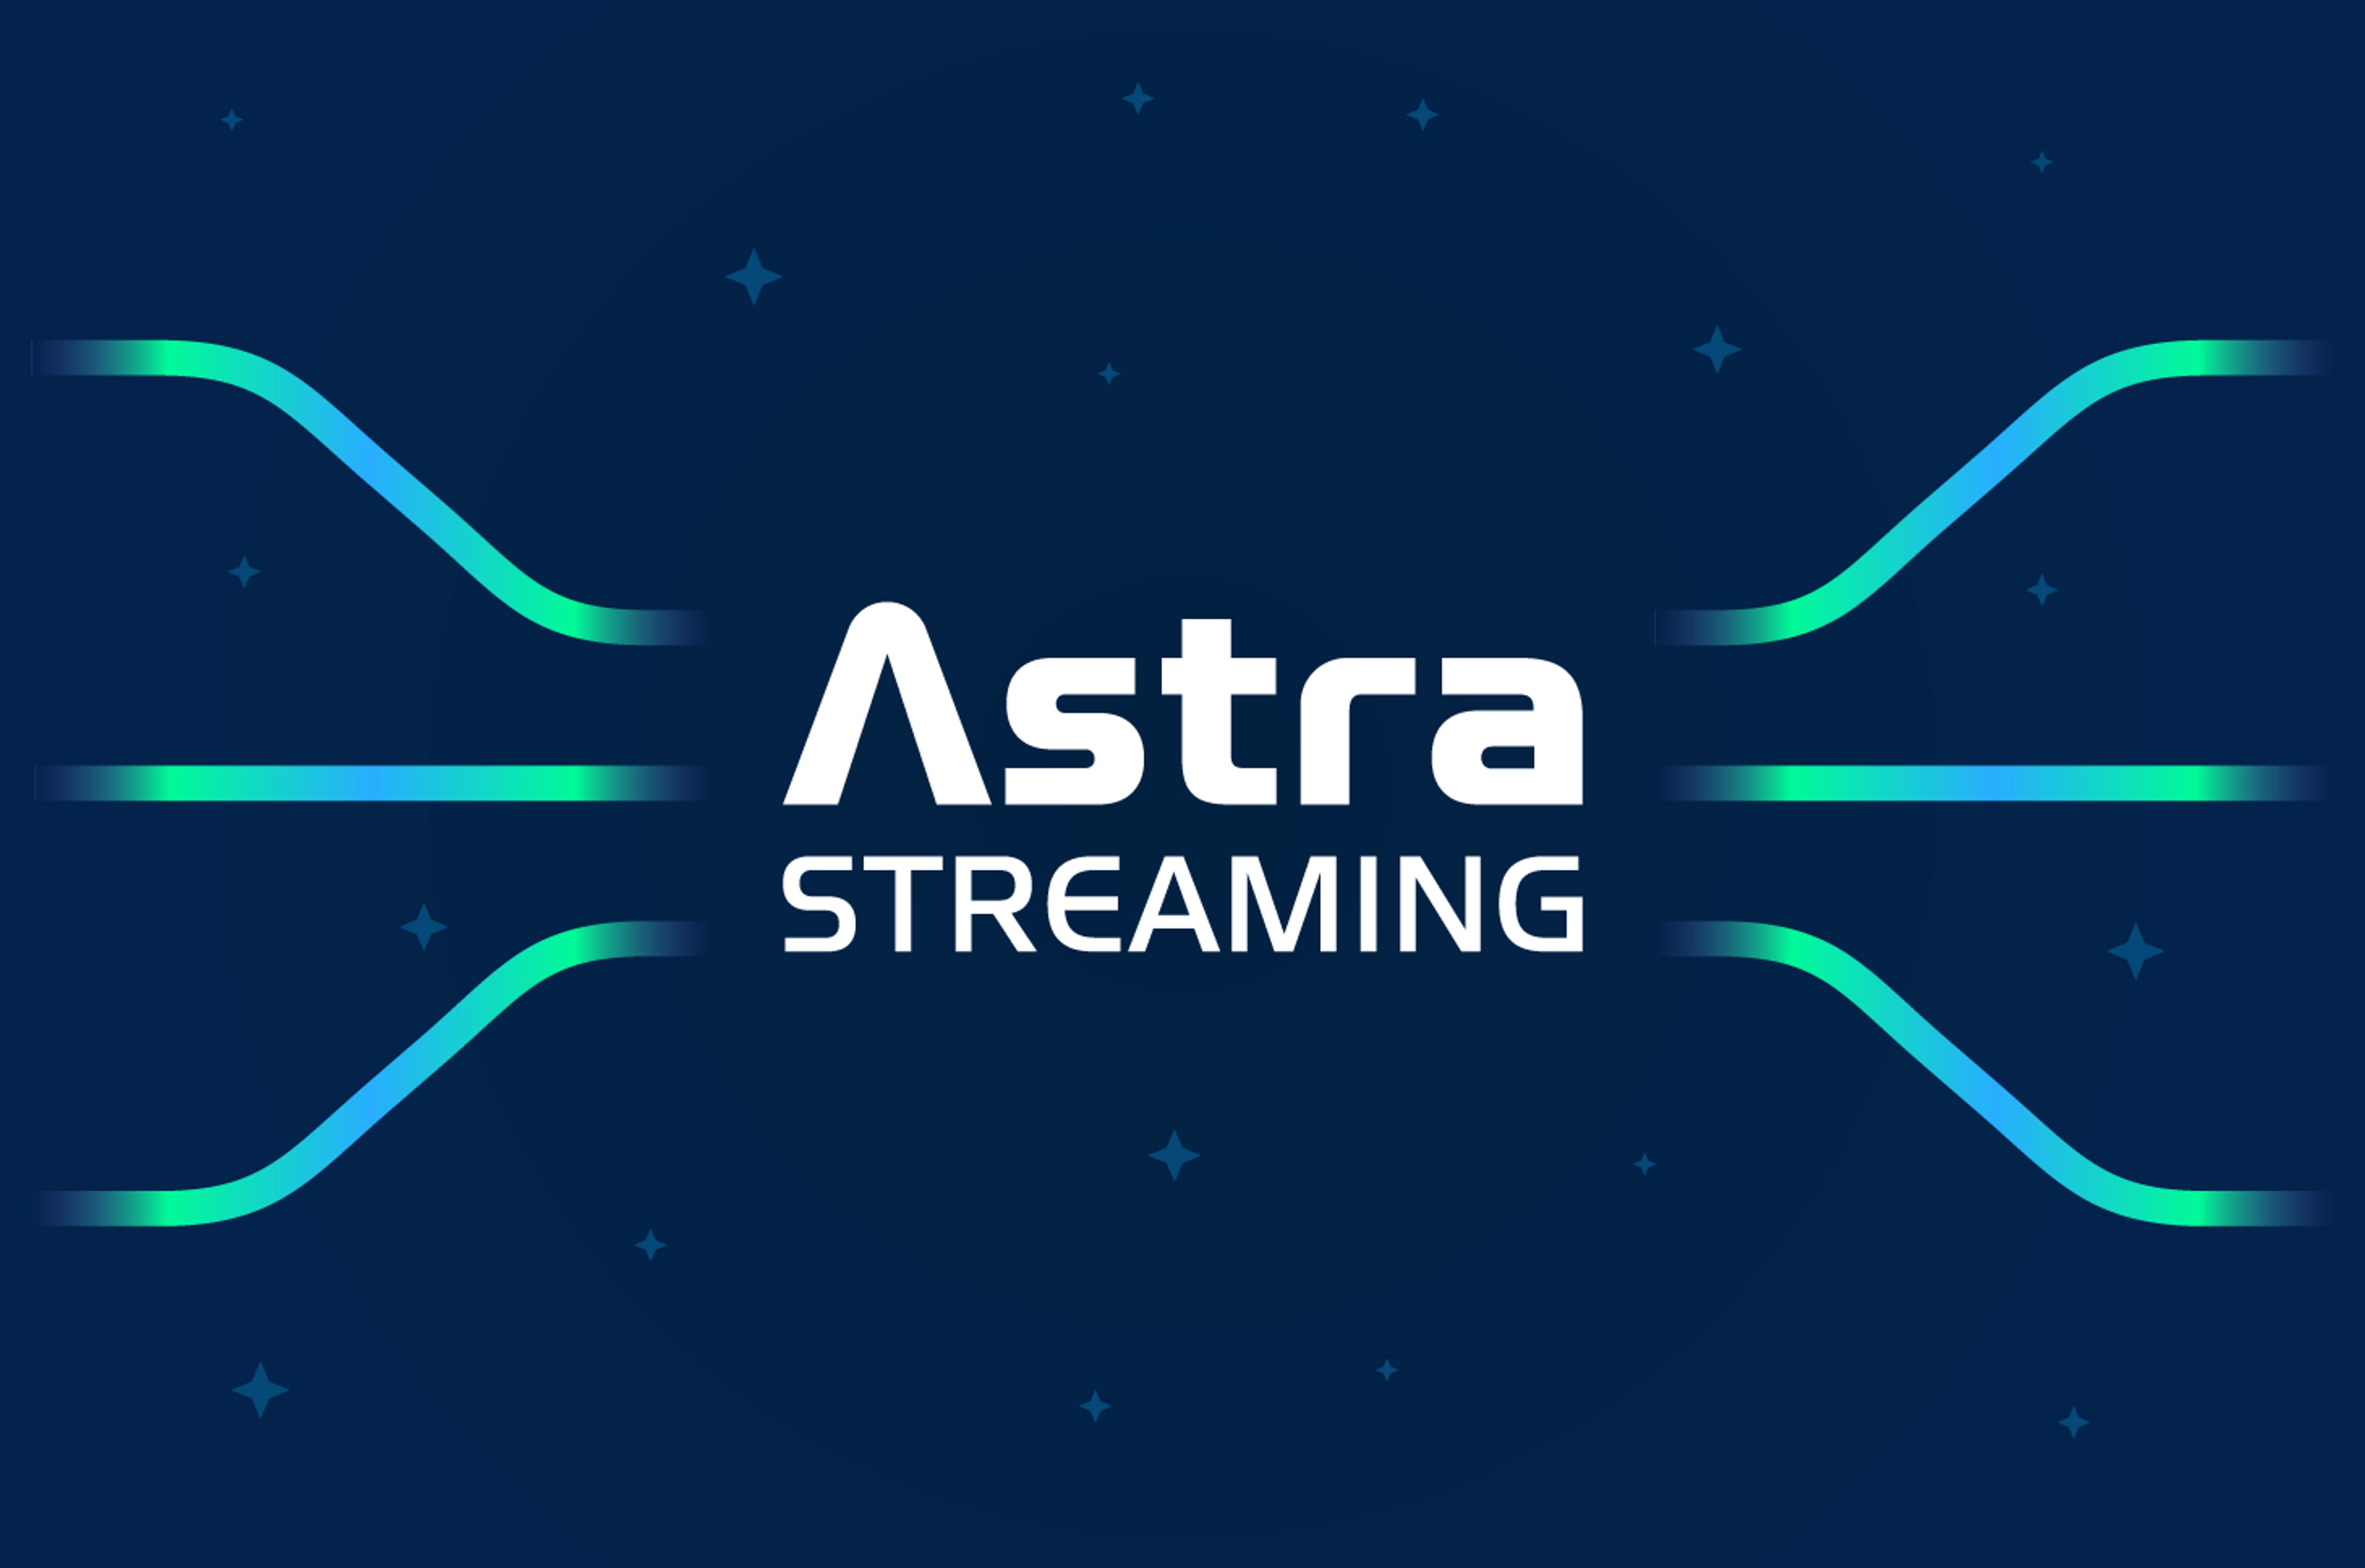 From geo-replication to advanced CDC—here’s what’s new in Astra Streaming